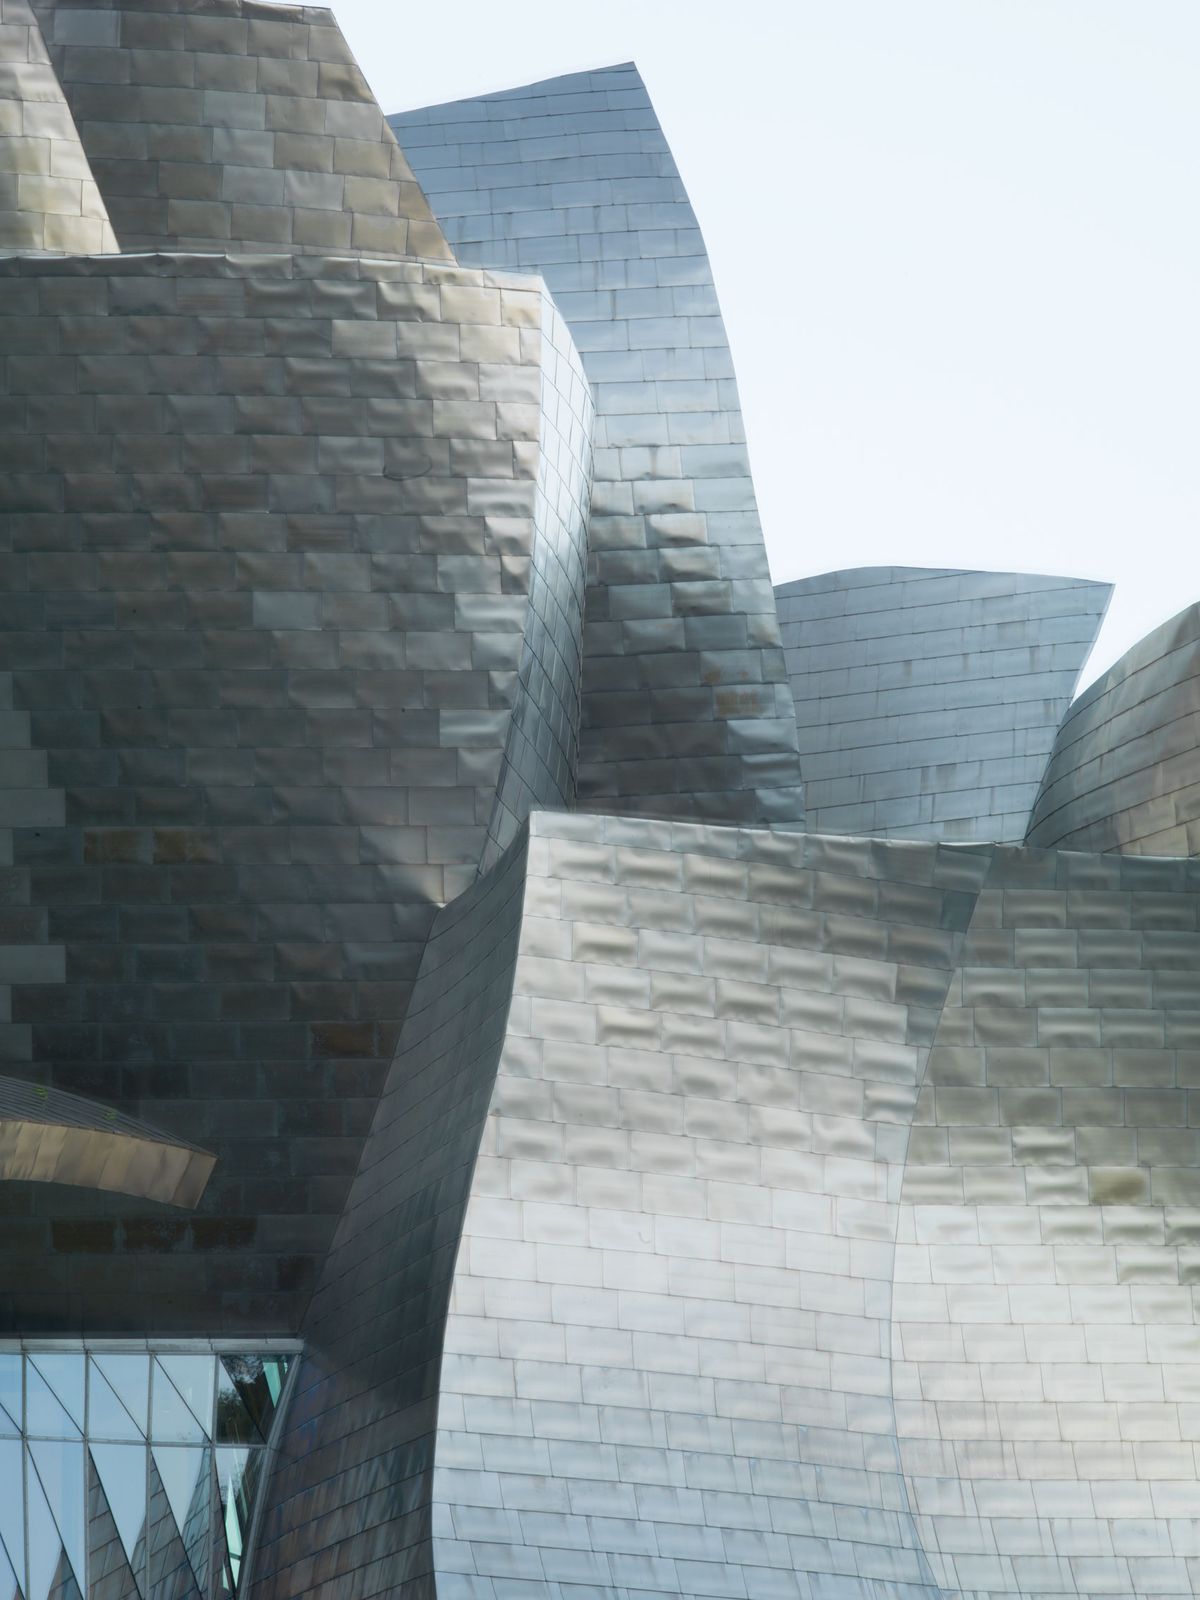 Bilbao, Guggenheim Museum-Frank Gehry. Image by William Curtis Rolf